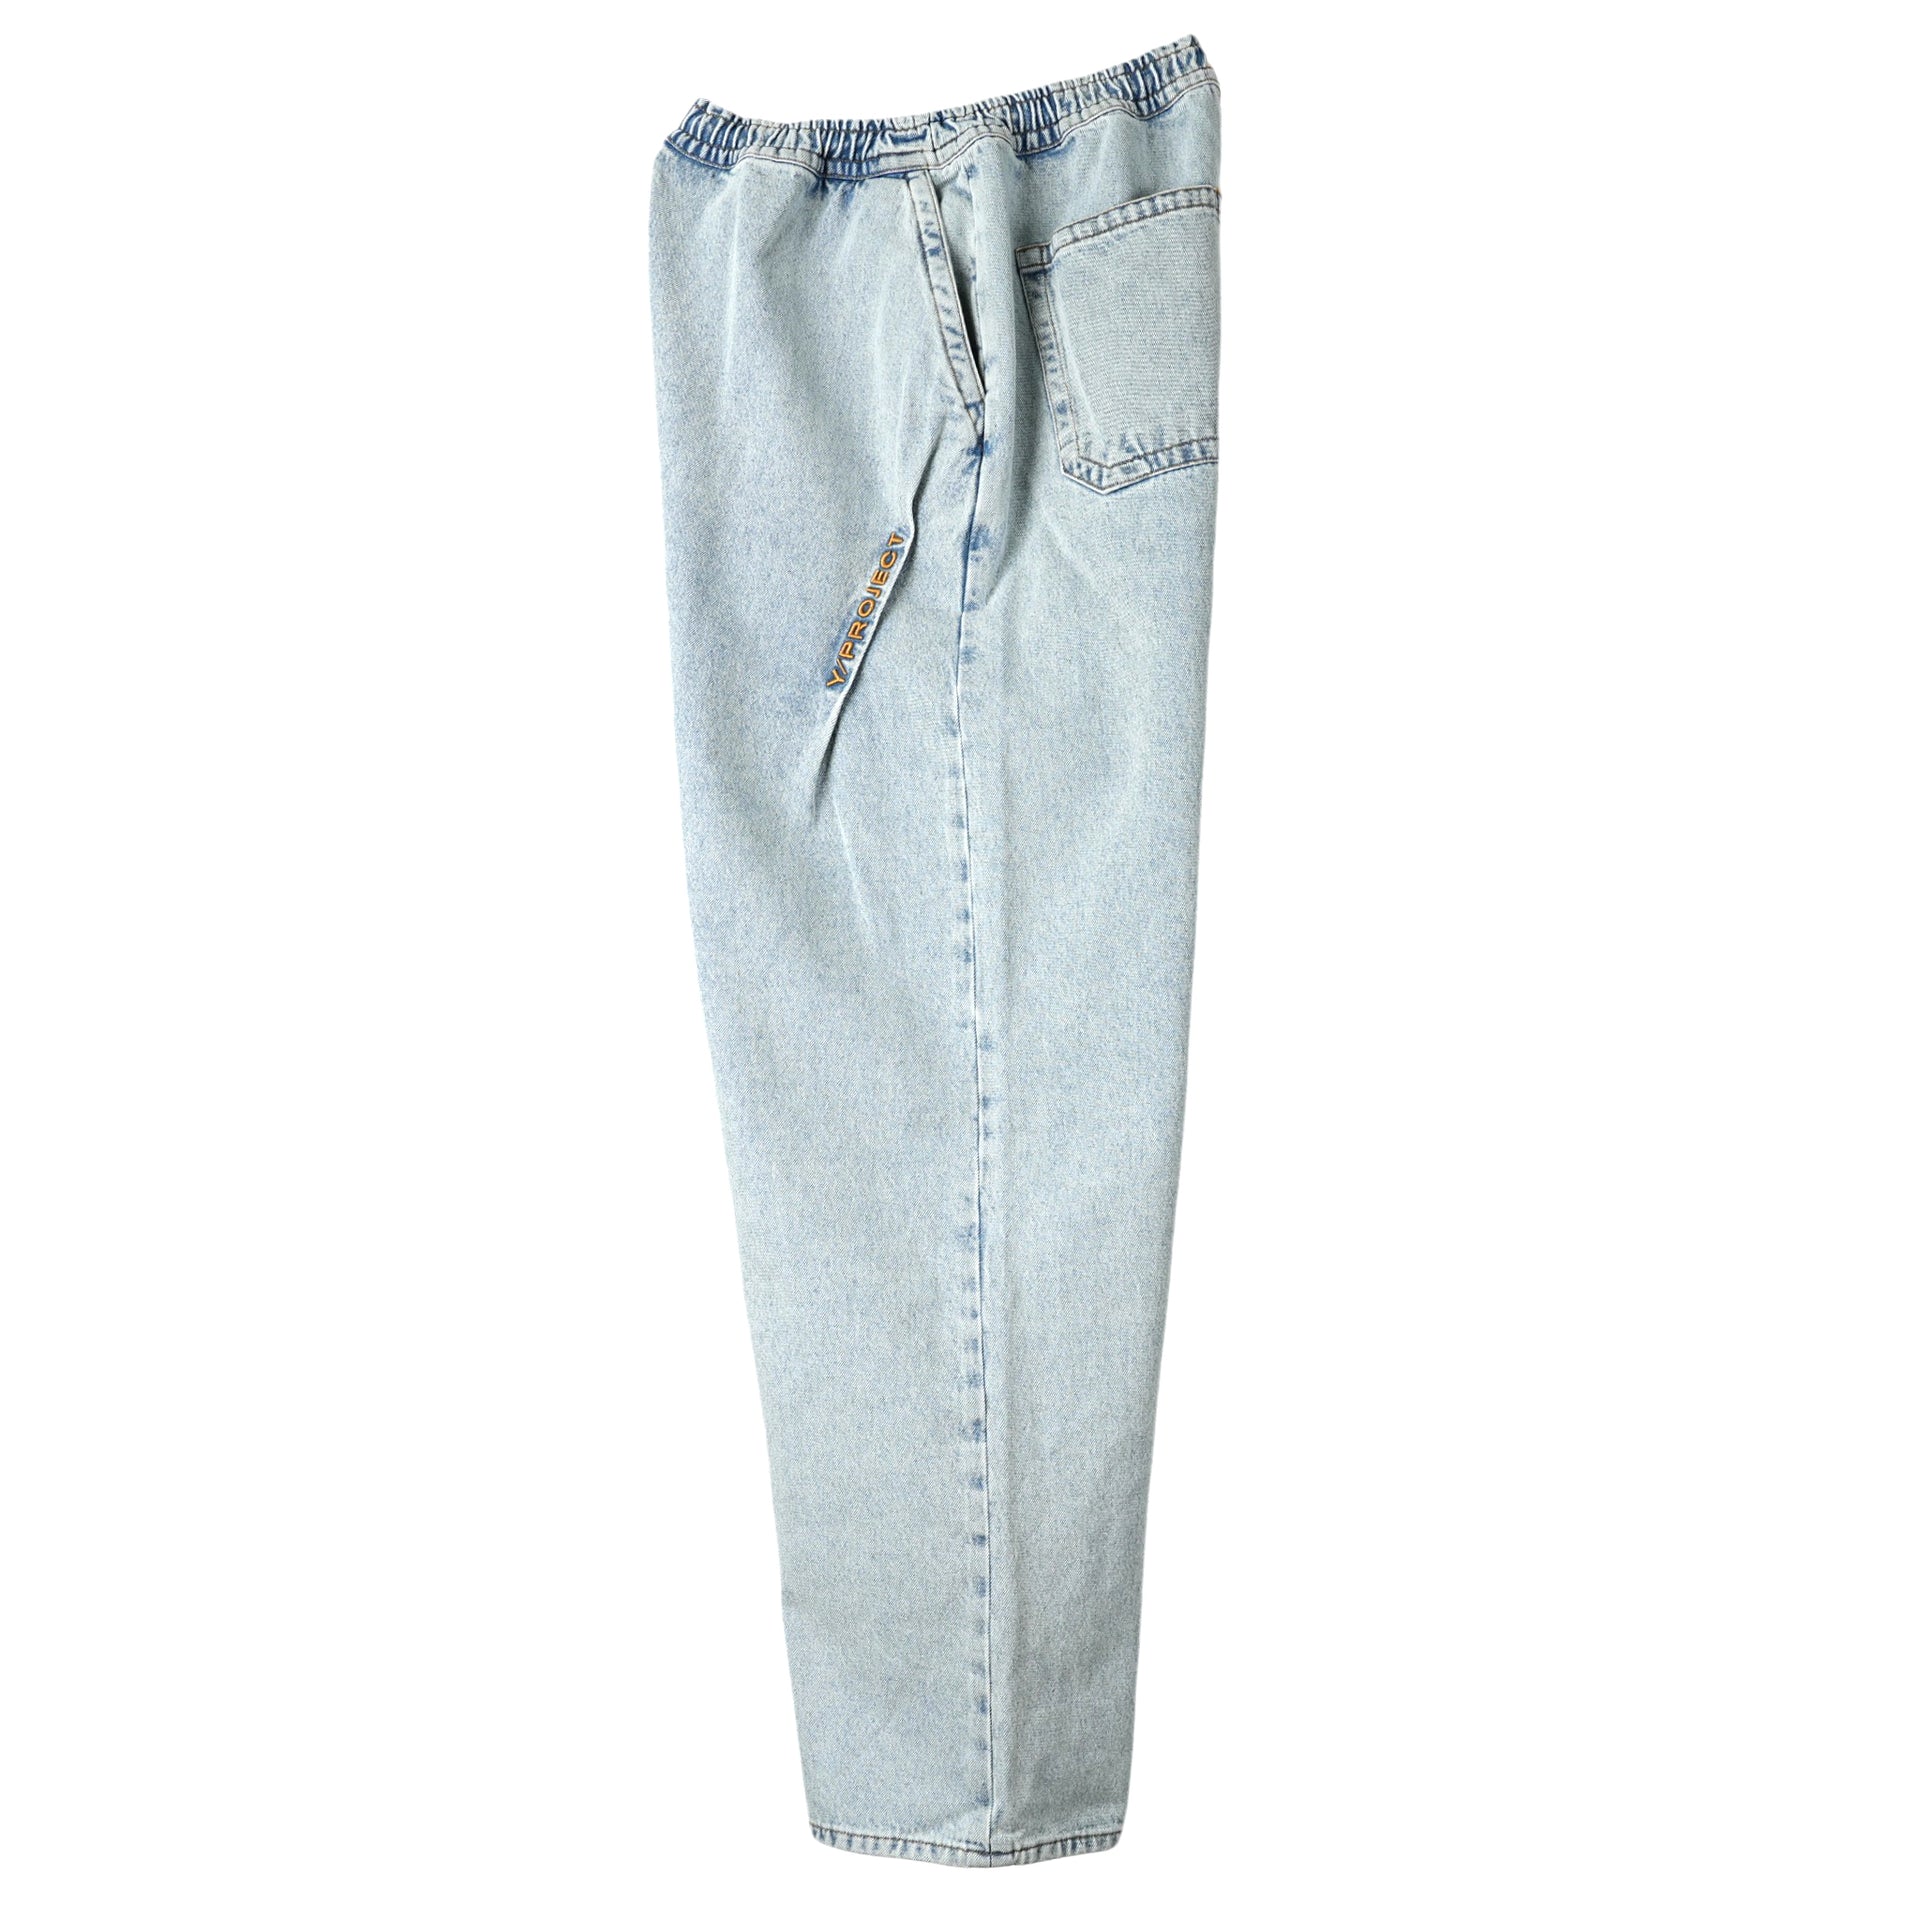 PINCHED LOGO SOUFFLE JEANS / ICE BLUE